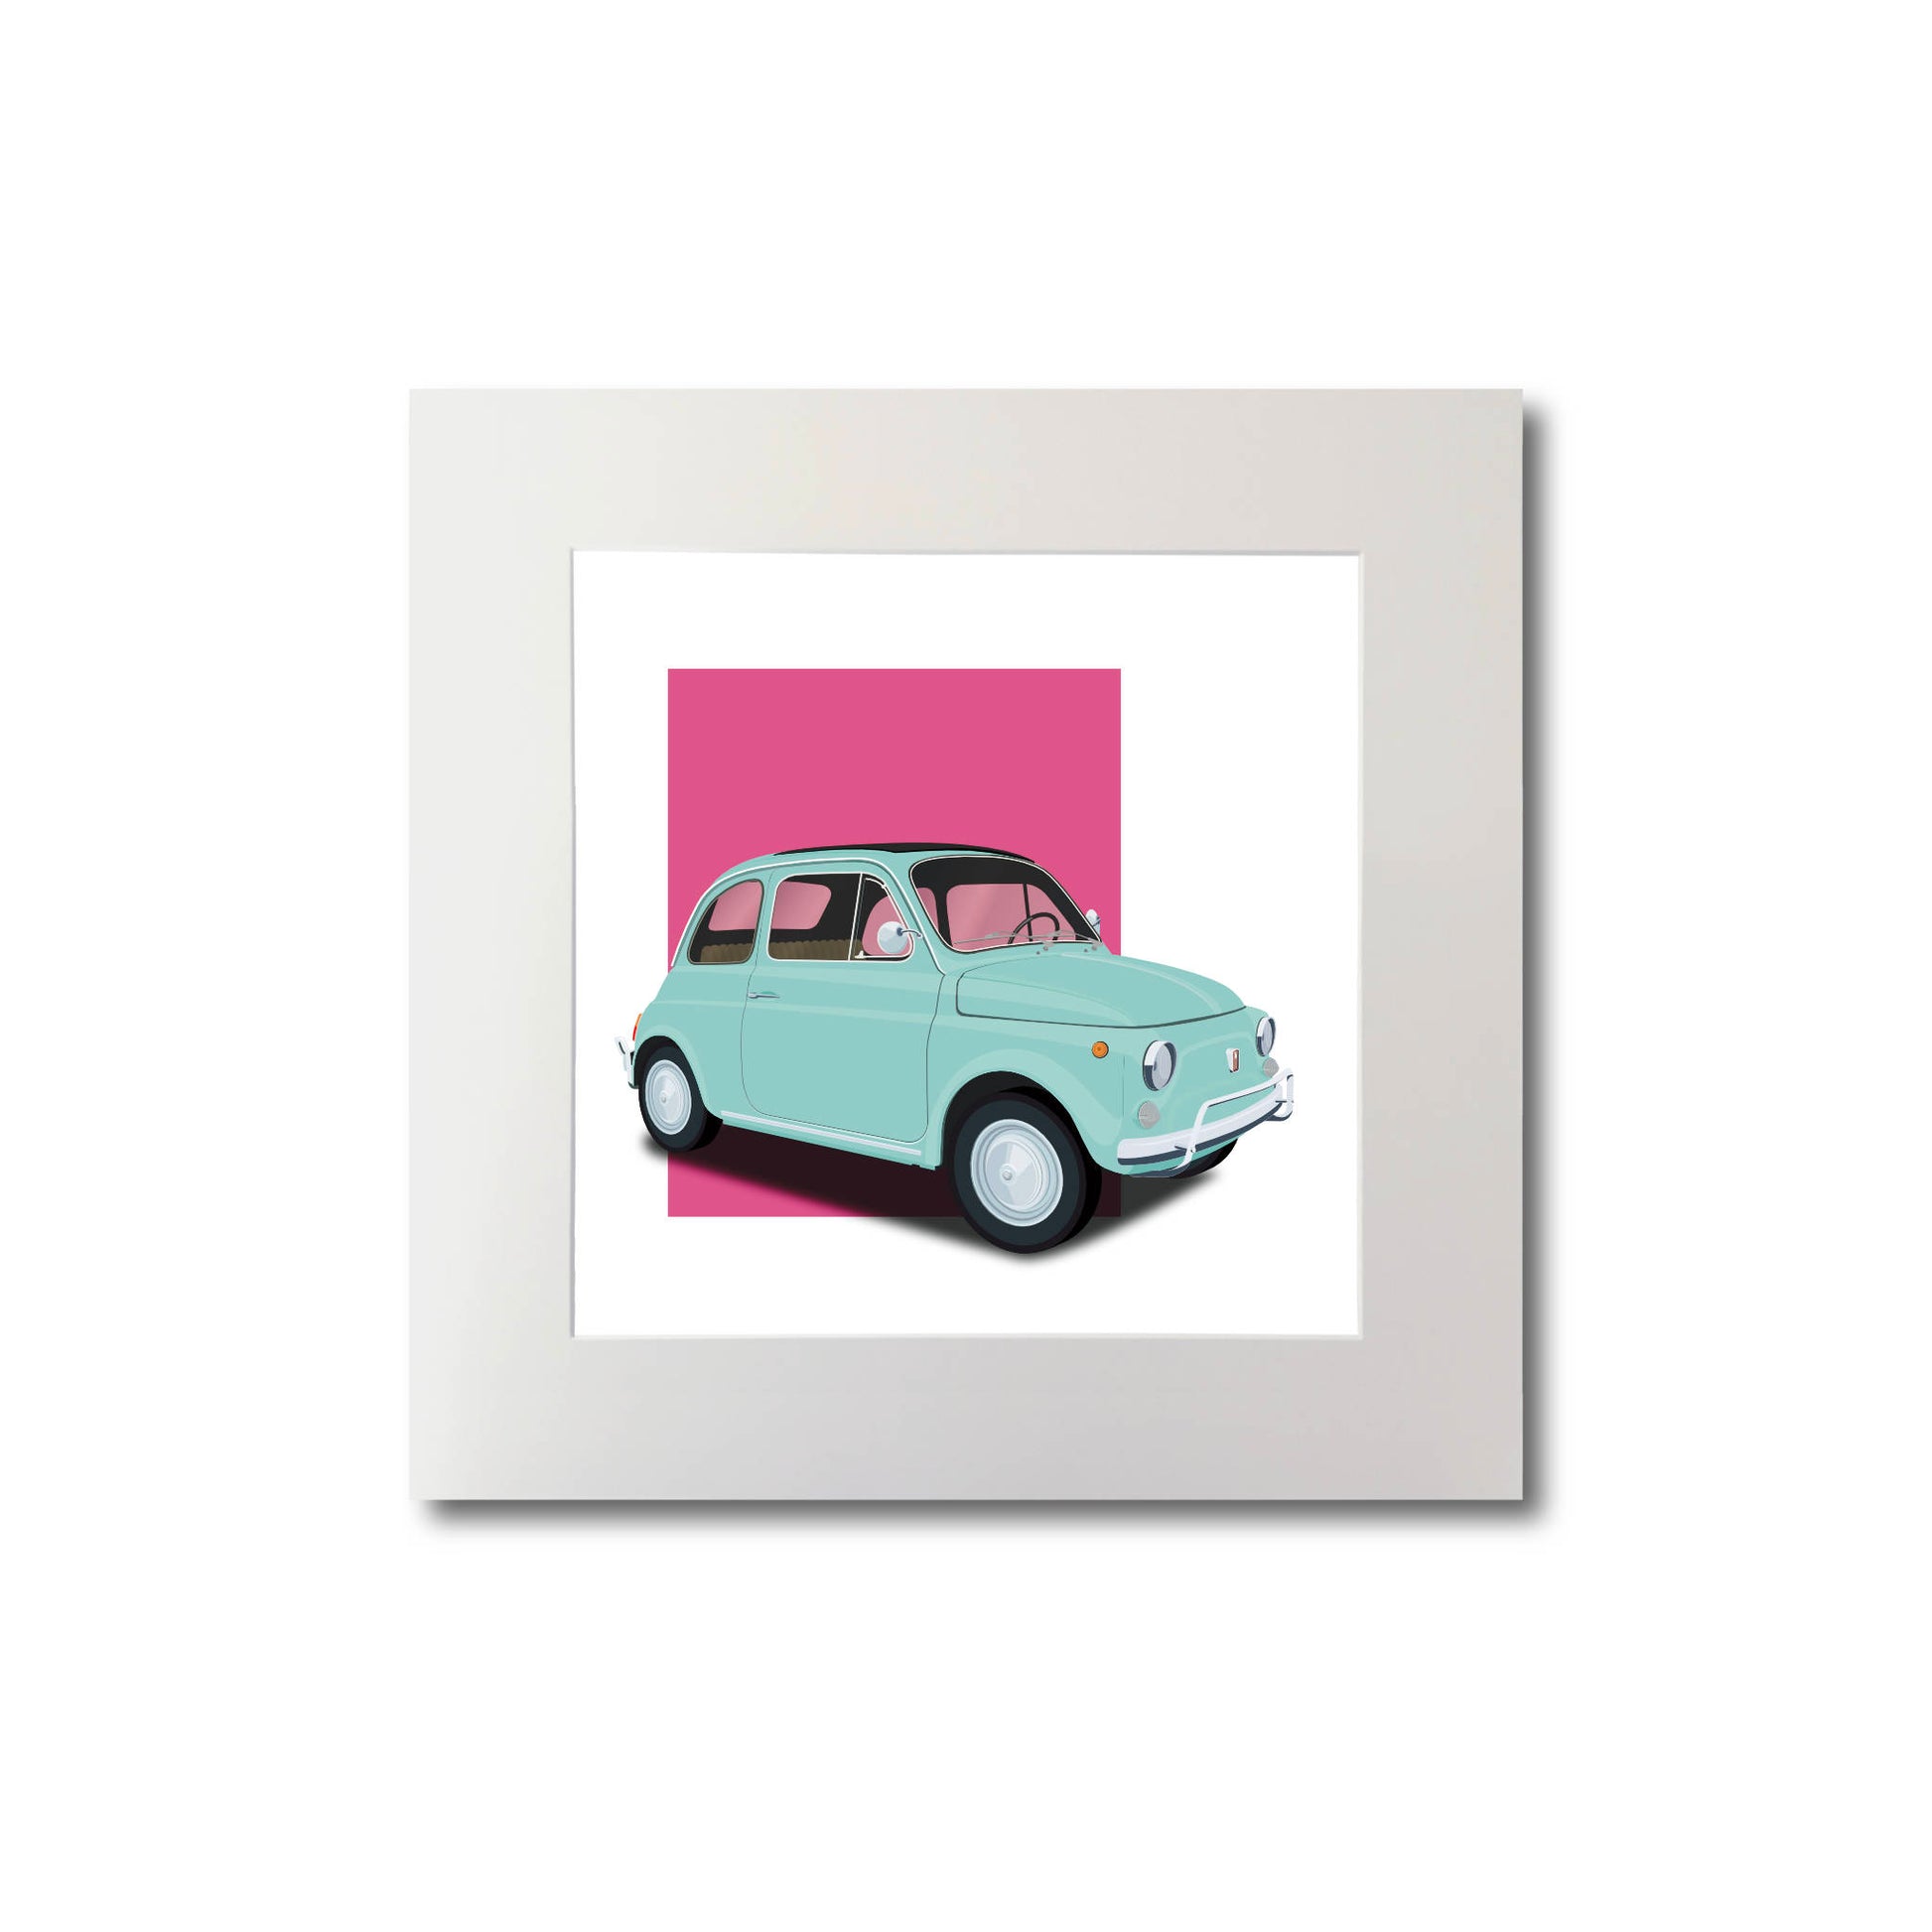 Stylish illustration of the classic 1960s Fiat 500 Cinquecento in perfect baby blue with pink background, measuring 20 x 20cm